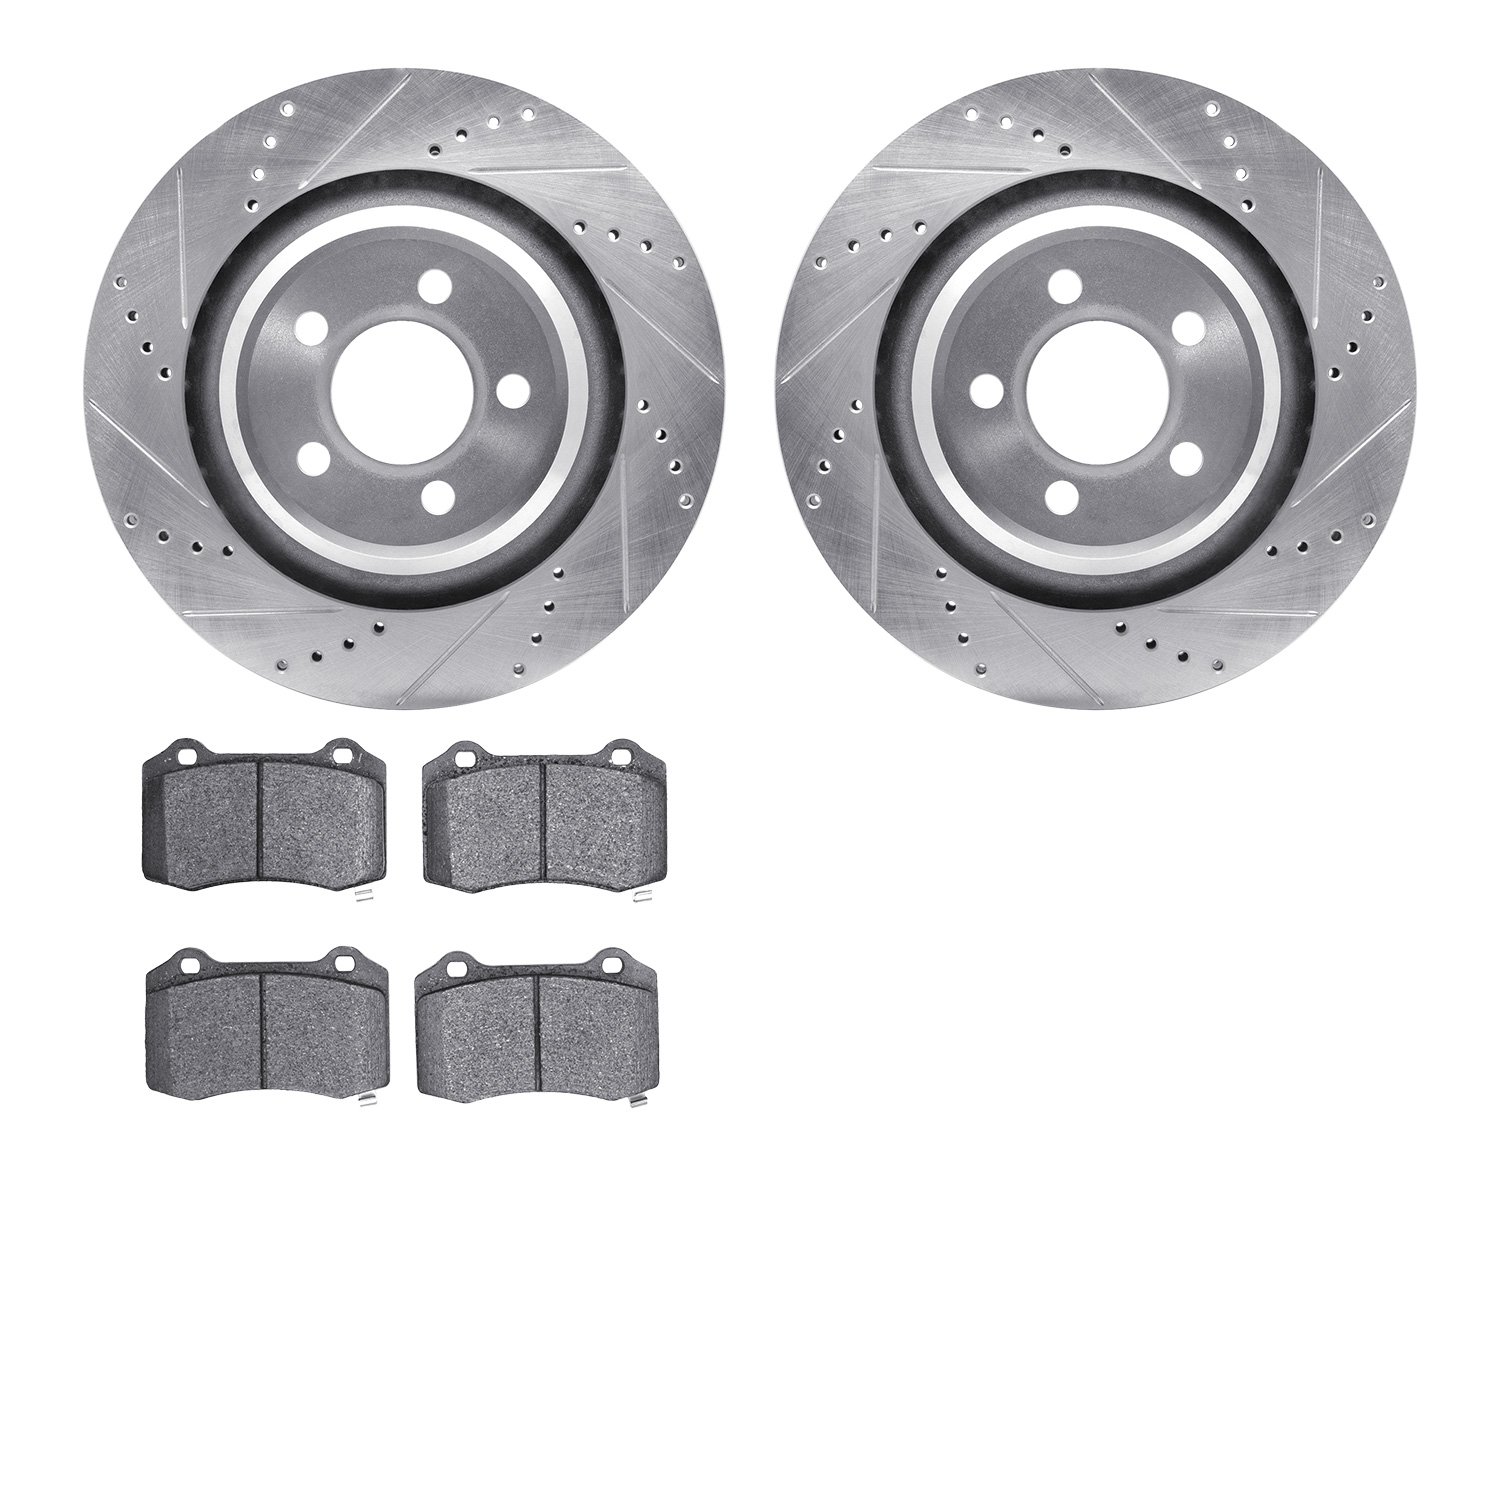 7402-39002 Drilled/Slotted Brake Rotors with Ultimate-Duty Brake Pads Kit [Silver], Fits Select Mopar, Position: Rear